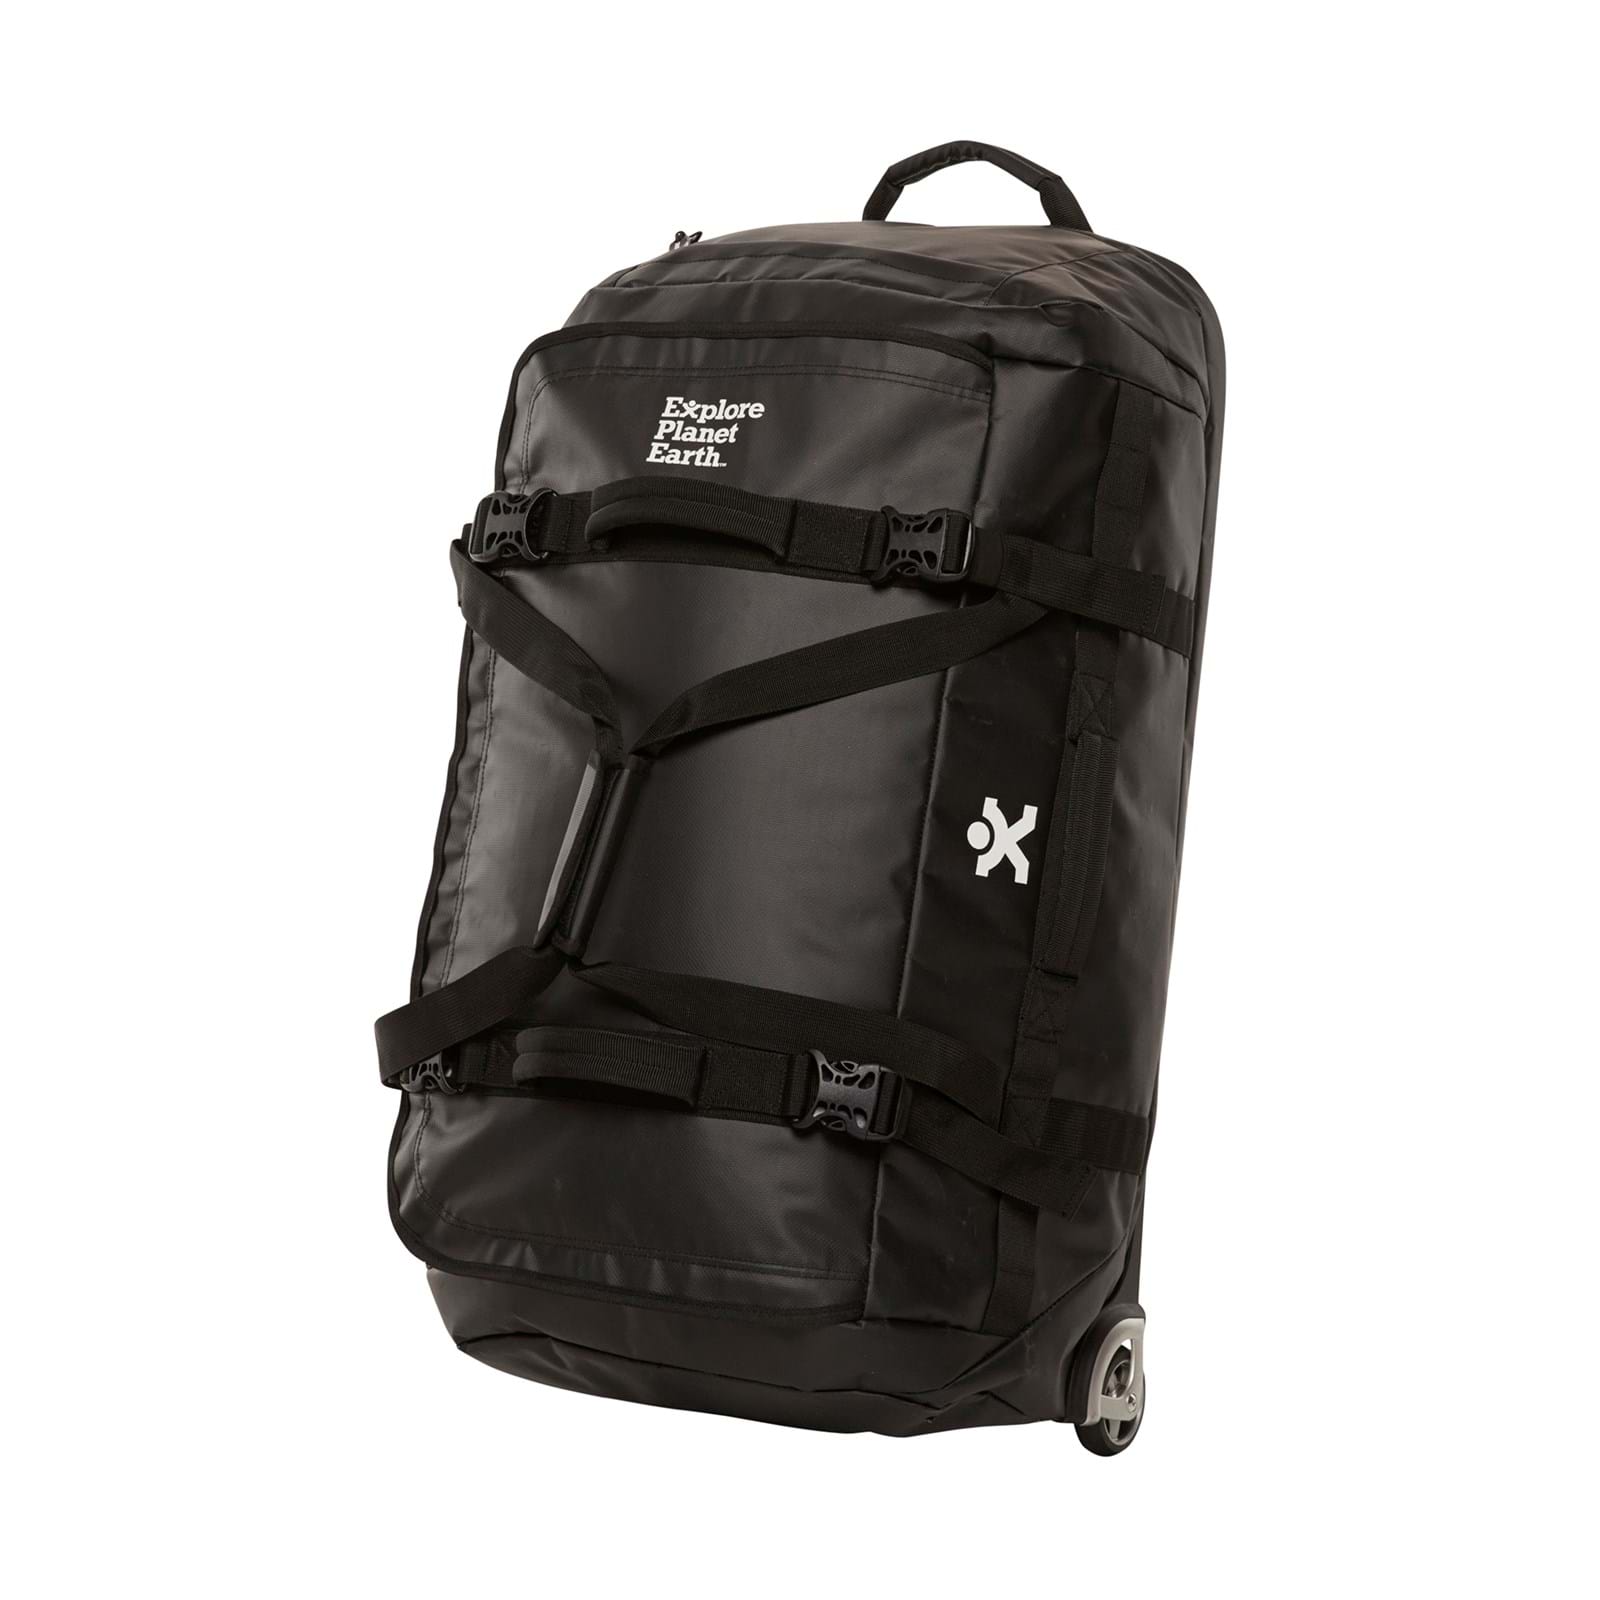 Duffle Bag With Wheels | Pisces Roller Bags | EPE Australia